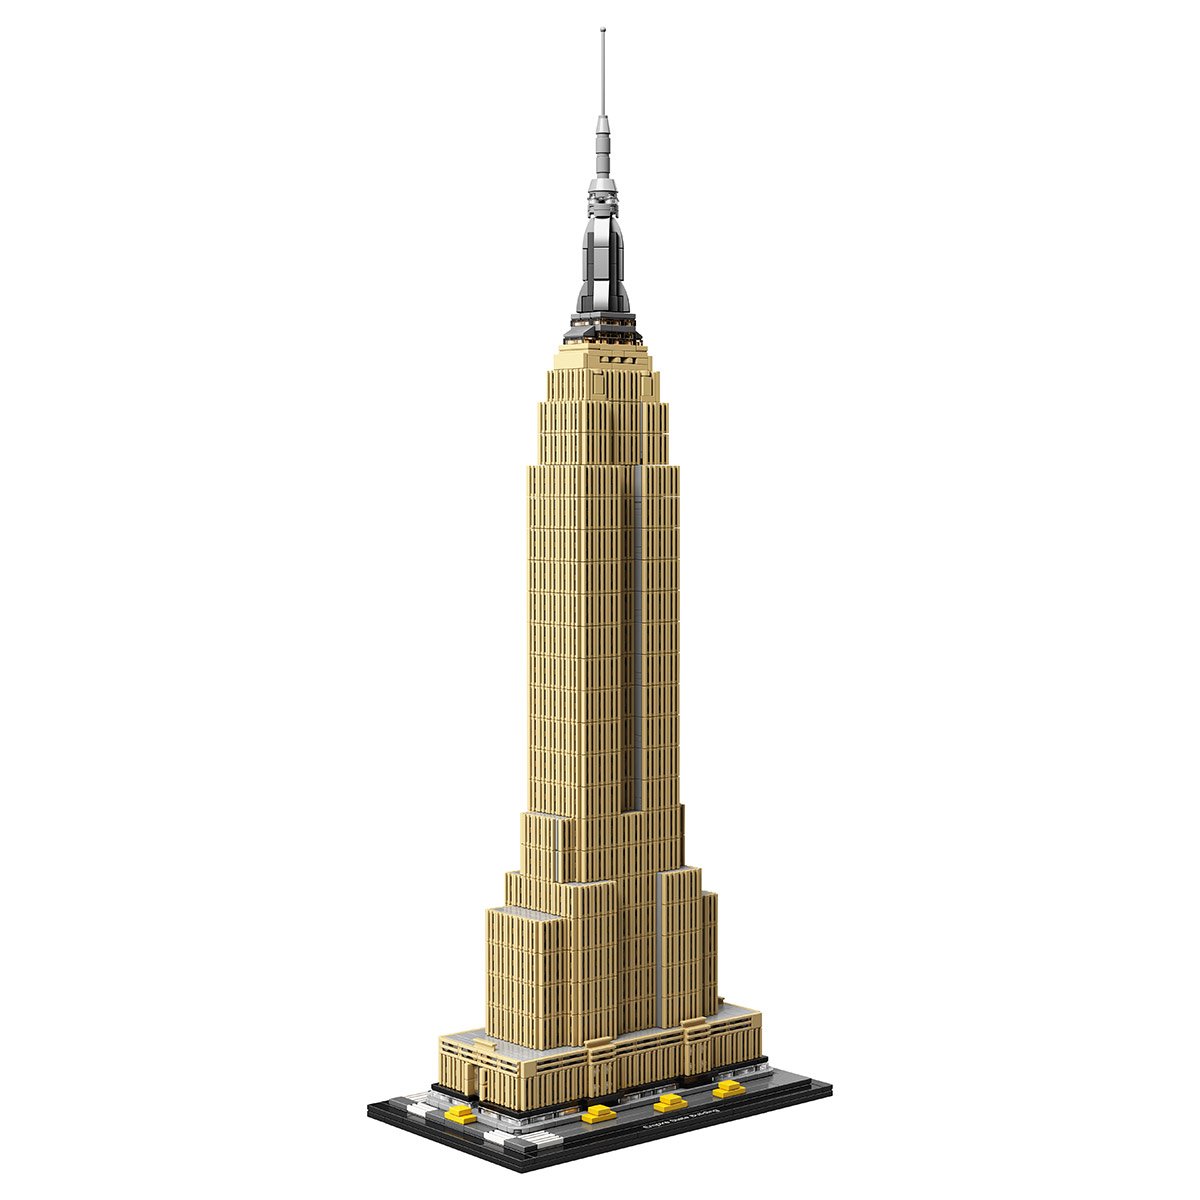 empire state building